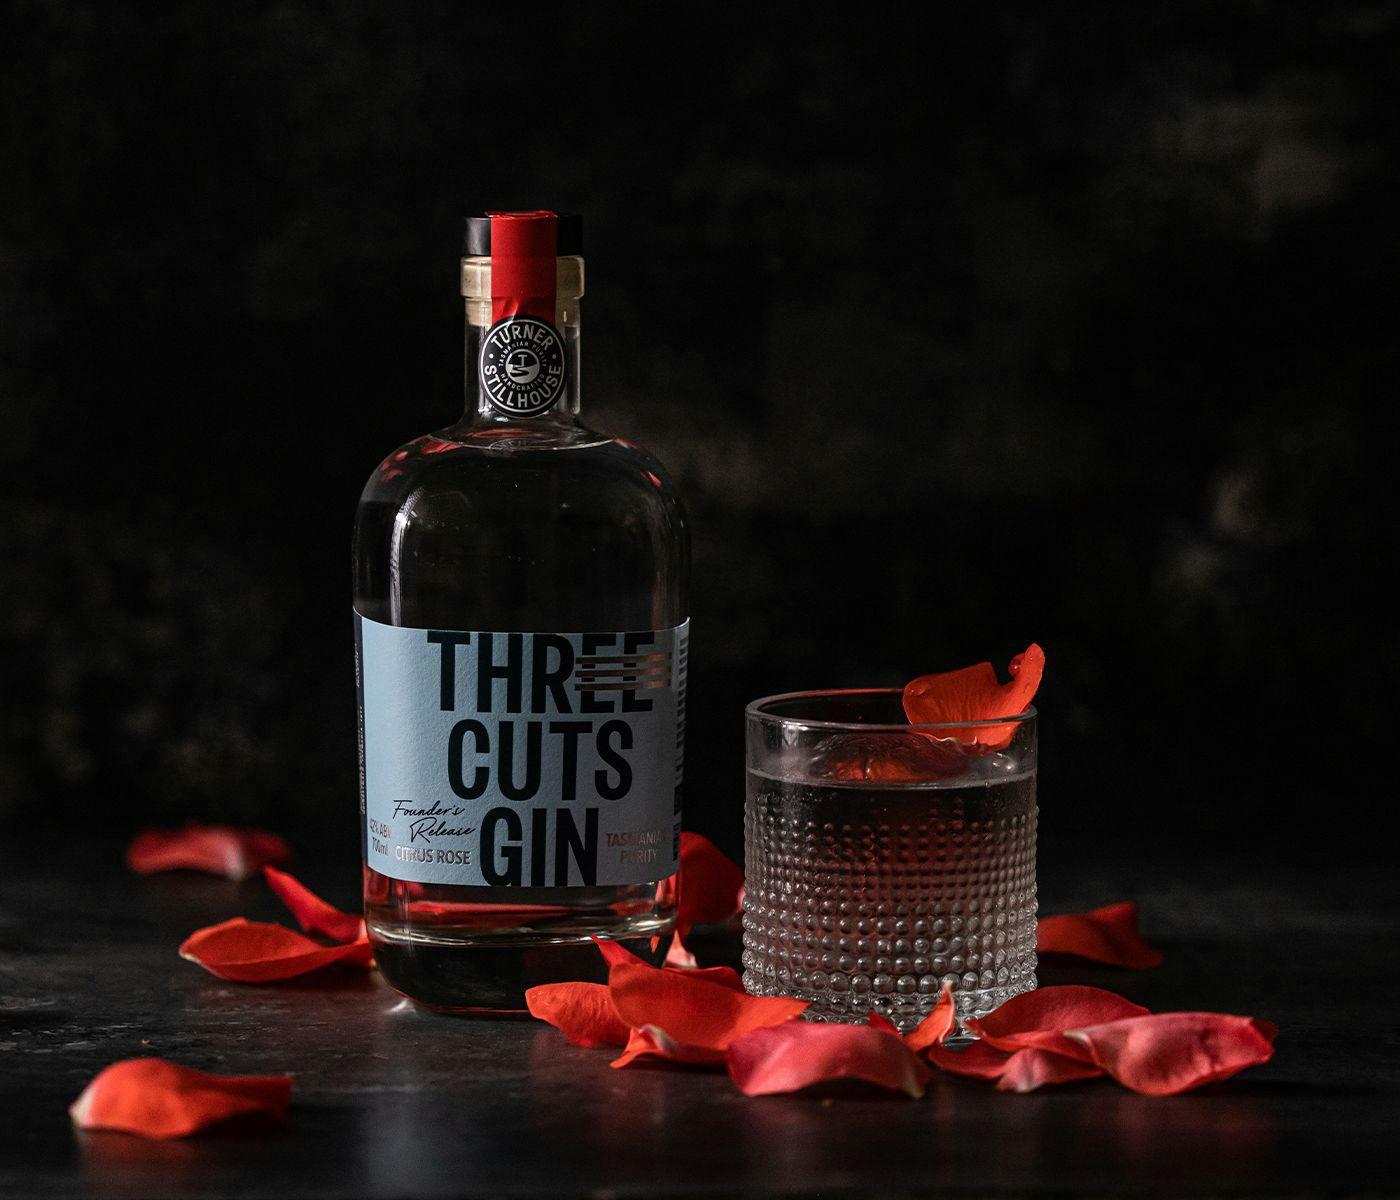 A bottle of Three Cuts Gin accompanied by a glass of gin and tonic, rose petals surround both.